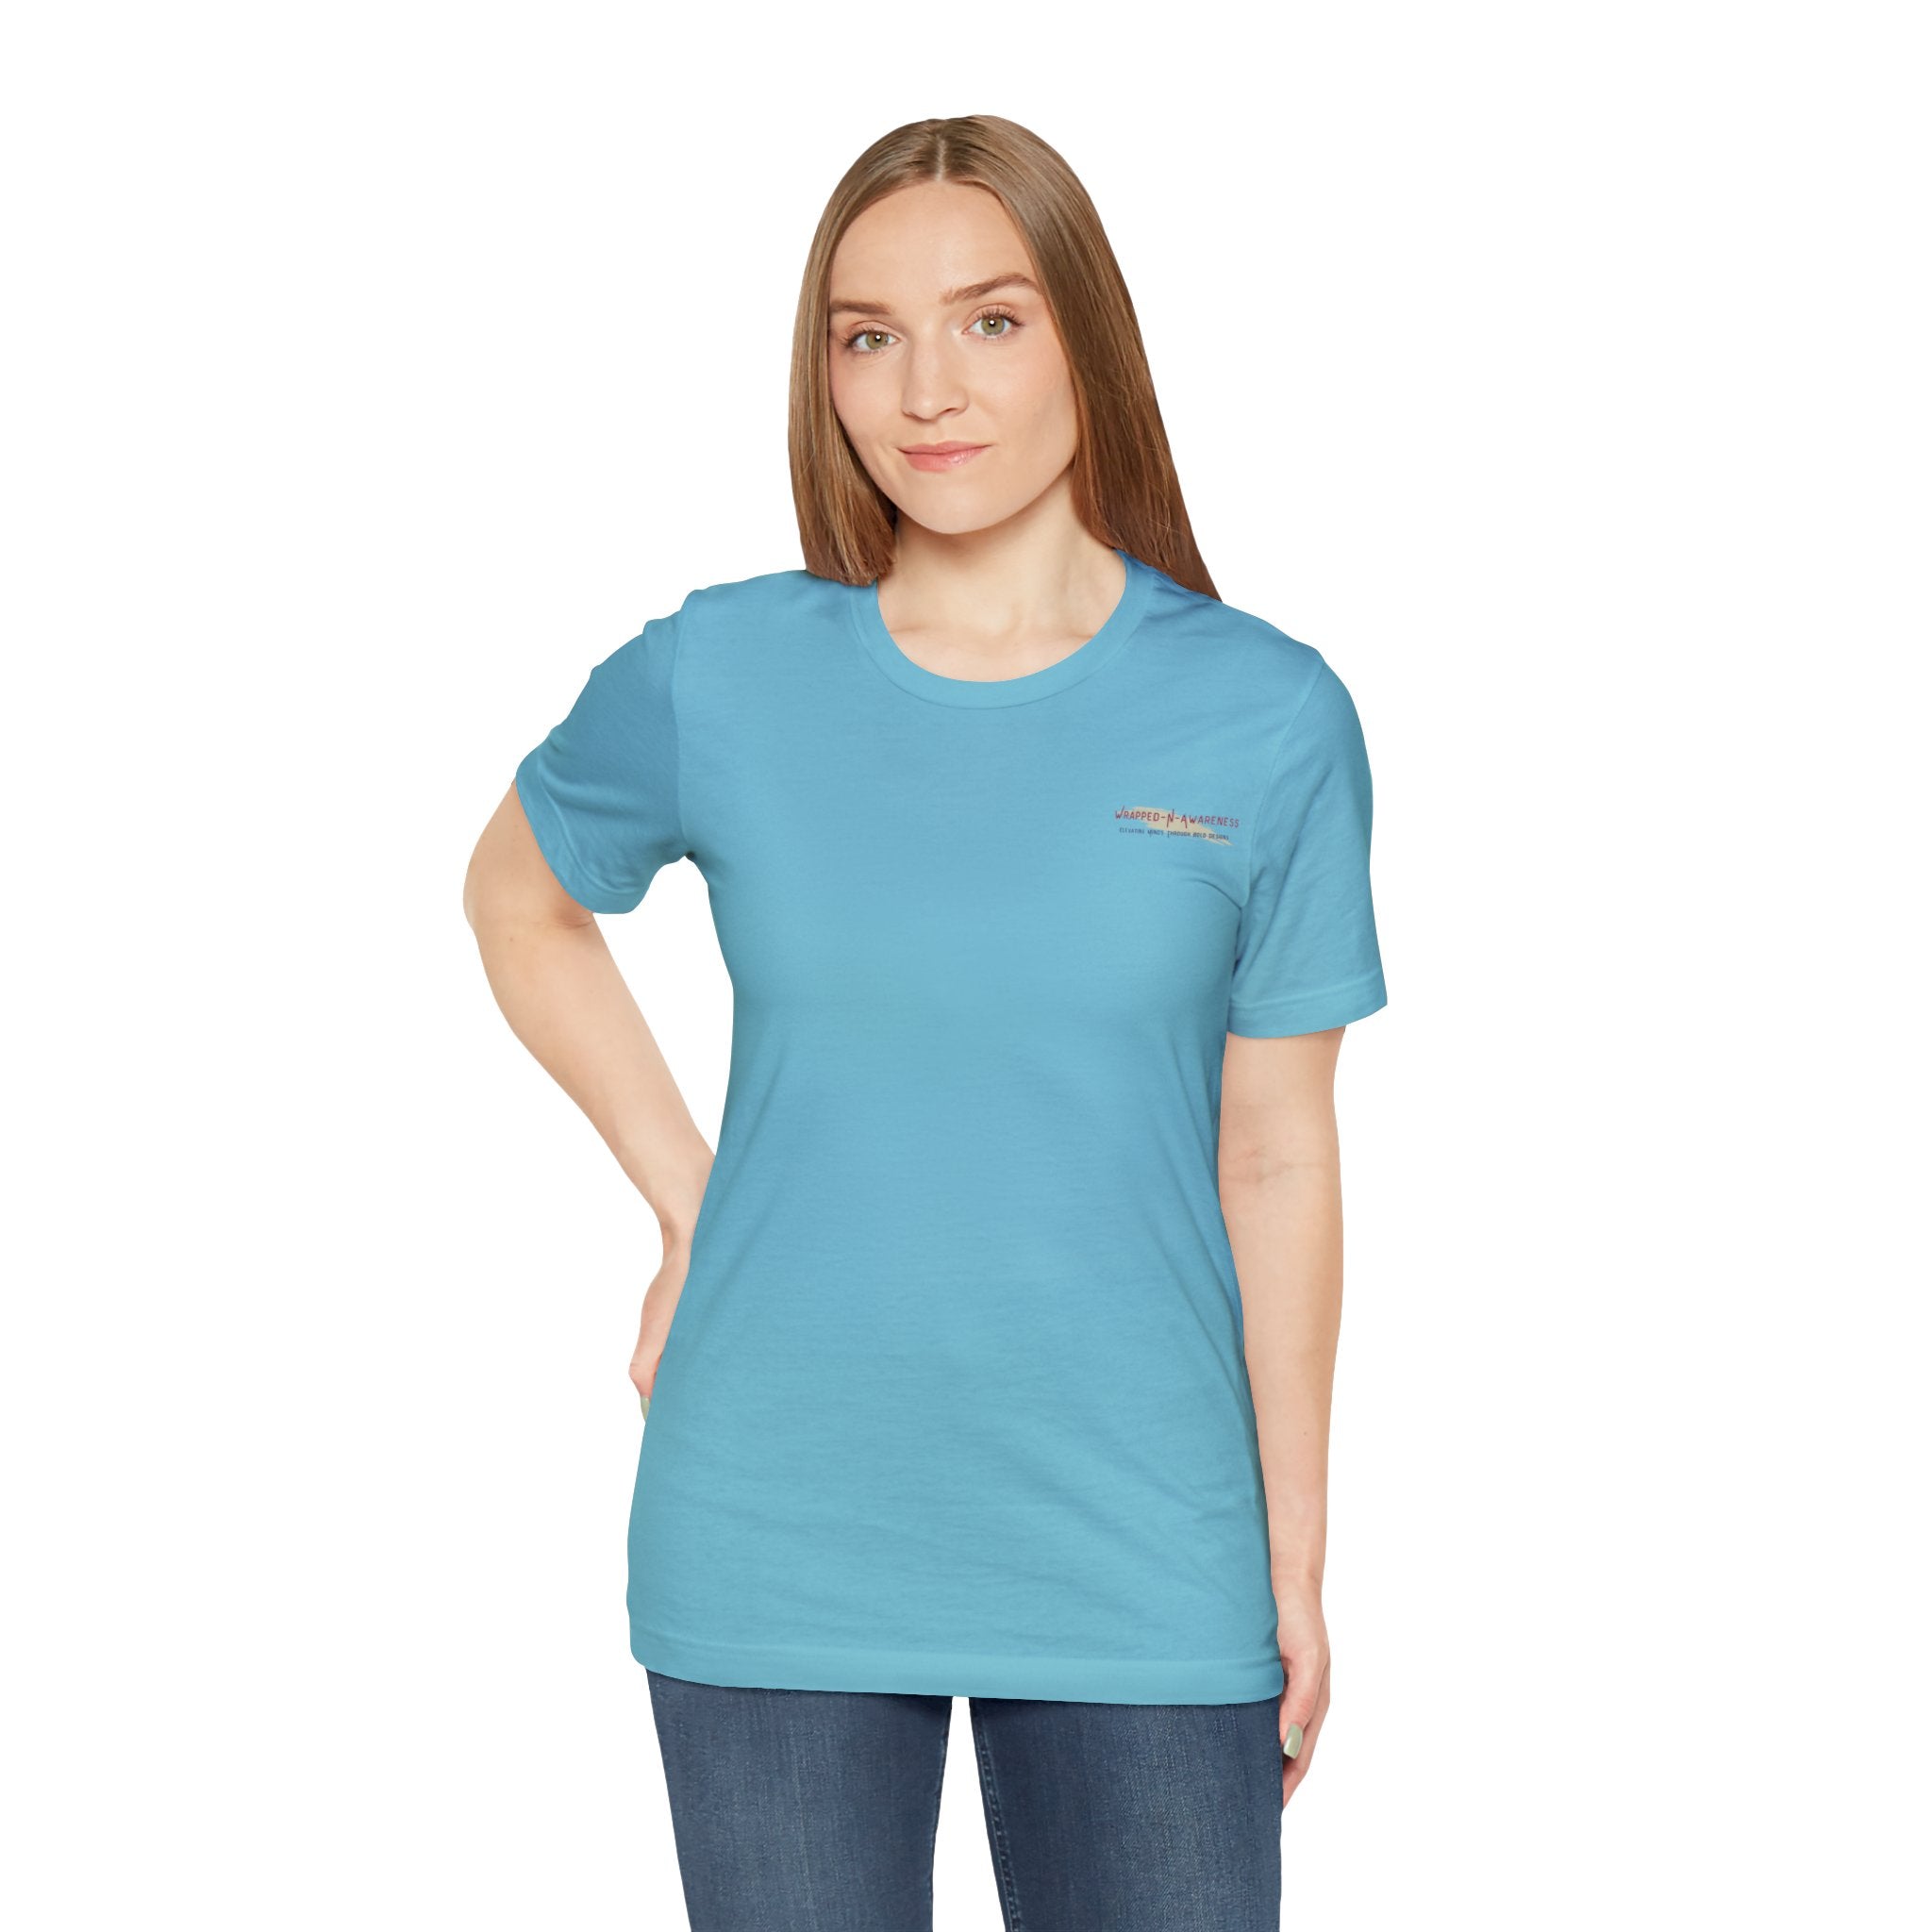 Inspire Growth Jersey Tee - Bella+Canvas 3001 Turquoise Airlume Cotton Bella+Canvas 3001 Crew Neckline Jersey Short Sleeve Lightweight Fabric Mental Health Support Retail Fit Tear-away Label Tee Unisex Tee T-Shirt 5317335005201514837_2048 Printify